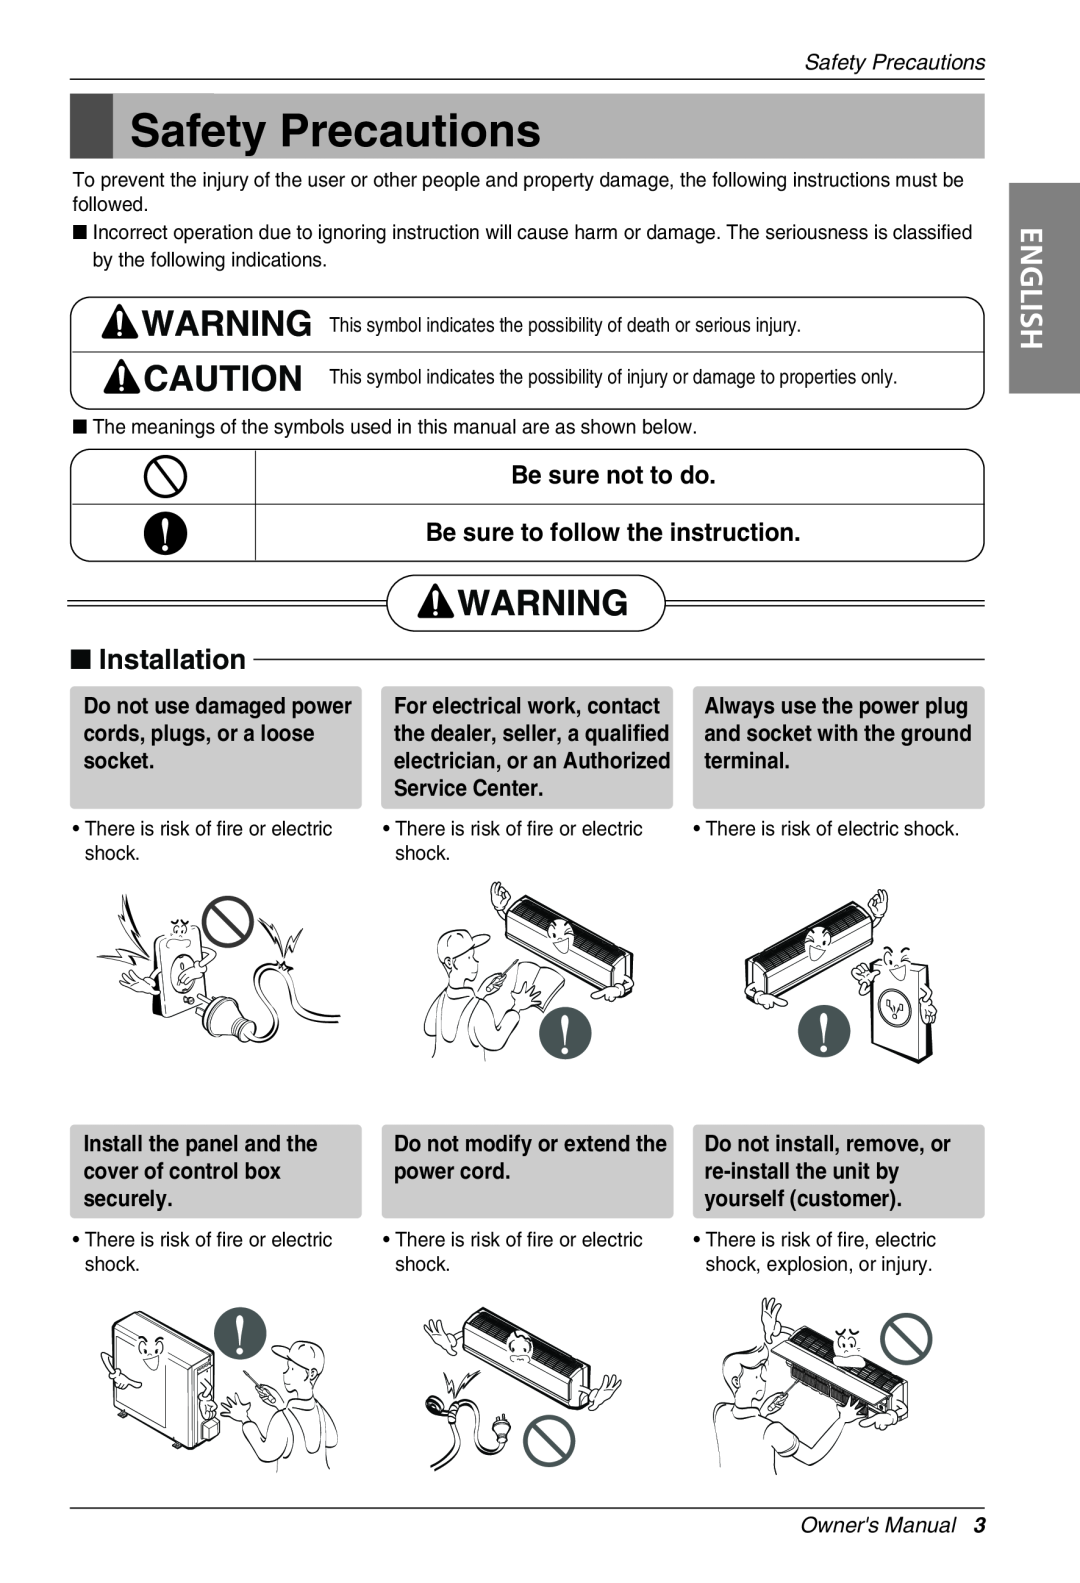 Beko LG-BKE7650 D, LG-BKE7700 D, LG-BKE 7800 D owner manual Safety Precautions, English, Installation, Be sure not to do 